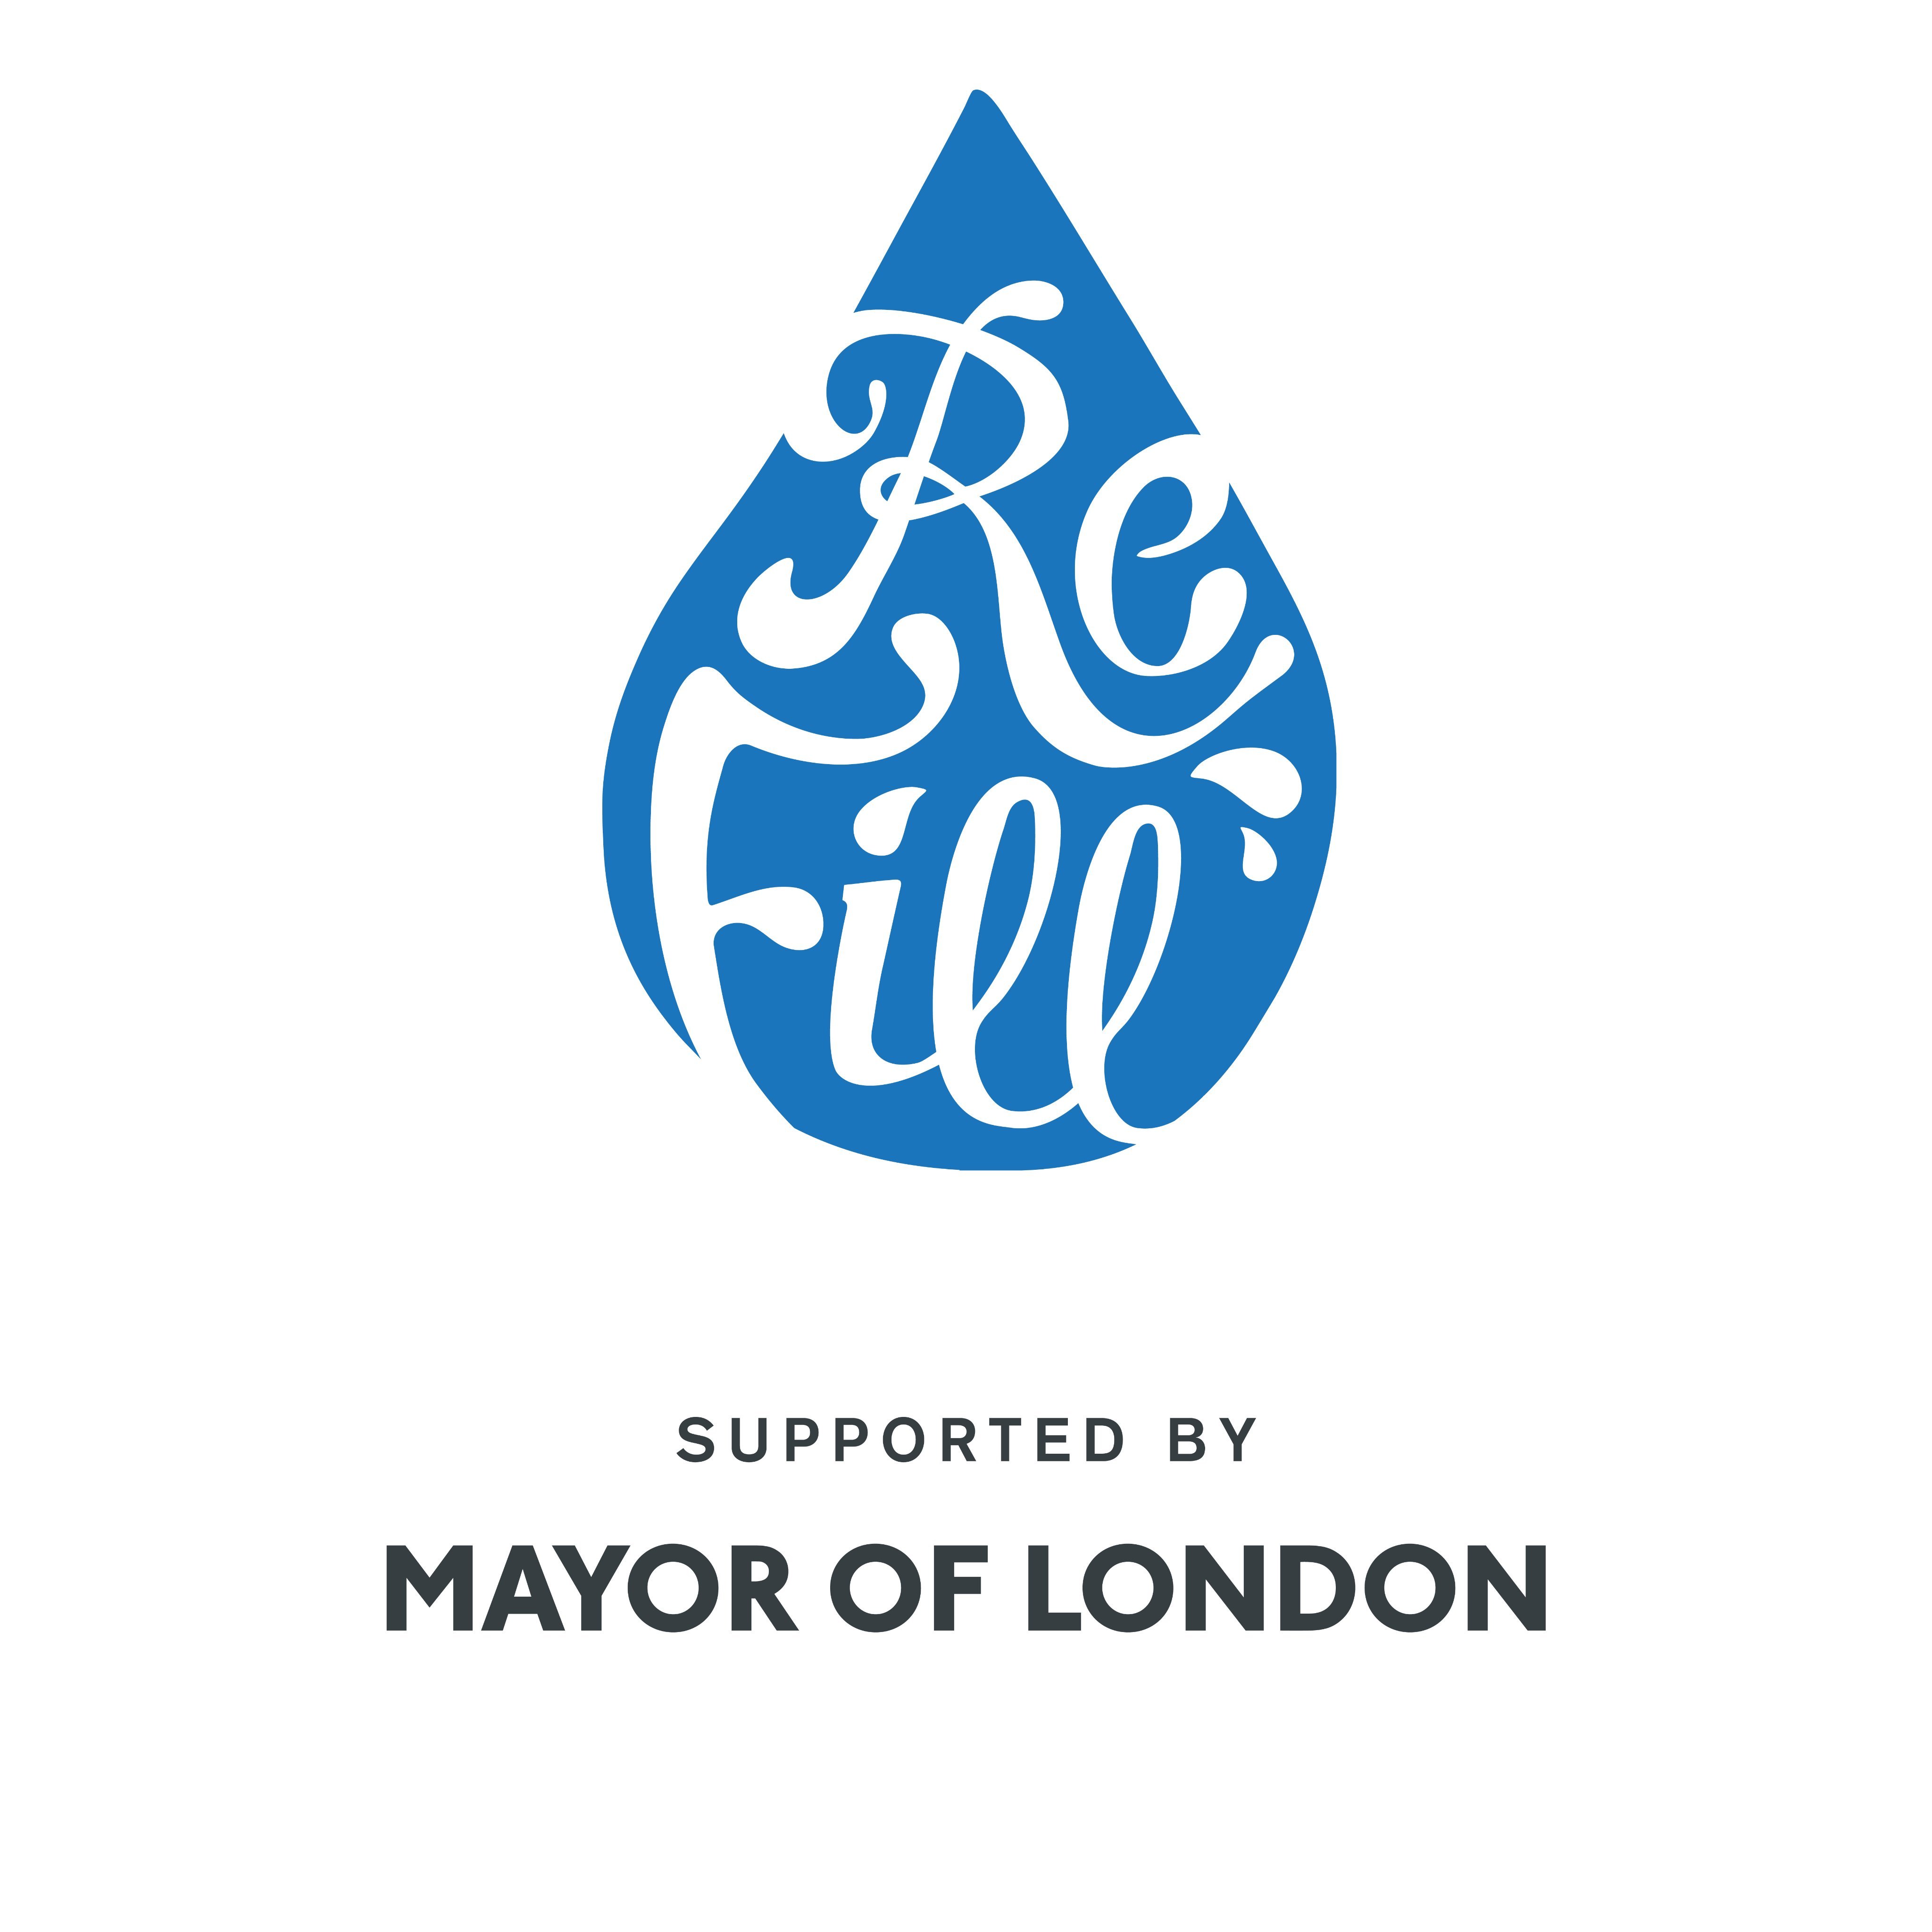 Find free tap water on the go with our @Refill app 🤳💧 
A @CitytoSea_ Campaign 🌊
Supported by @MayorOfLondon 
#RefillRevolution #RefillLondon